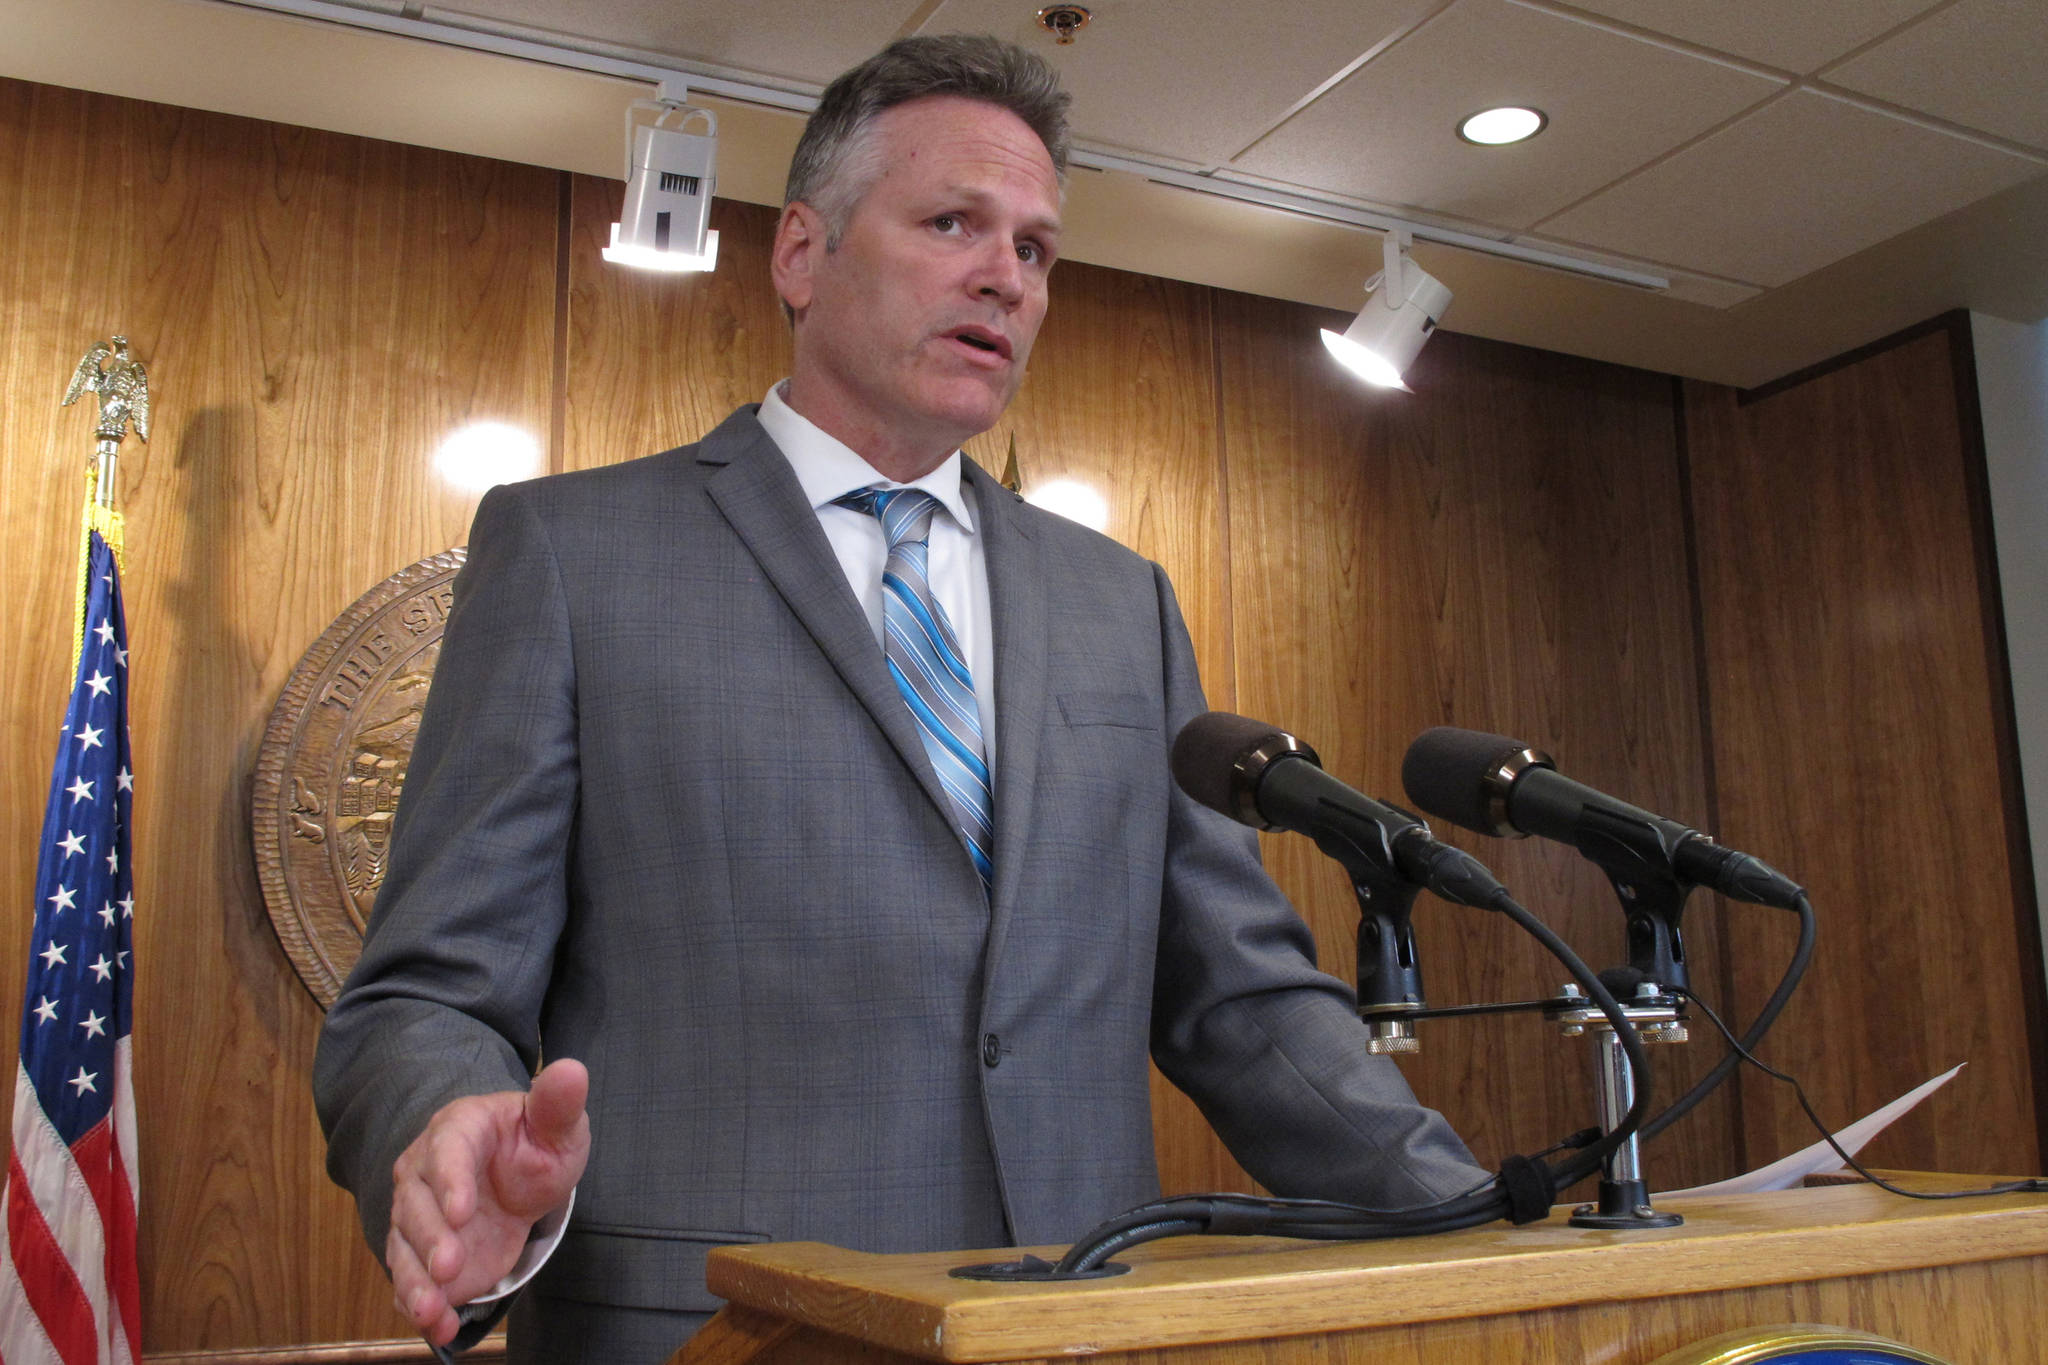 Alaska Gov. Mike Dunleavy speaks to reporters about his budget vetoes at the state Capitol in Juneau, Alaska Friday, June 28, 2019. The university system, health and social service programs and public broadcasting were among the areas affected by vetoes. The budget agreed to by the House and Senate cut state support for the university system by a fraction of what Dunleavy proposed. Lawmakers have the ability to override budget vetoes if they can muster sufficient support. (AP Photo/Becky Bohrer)